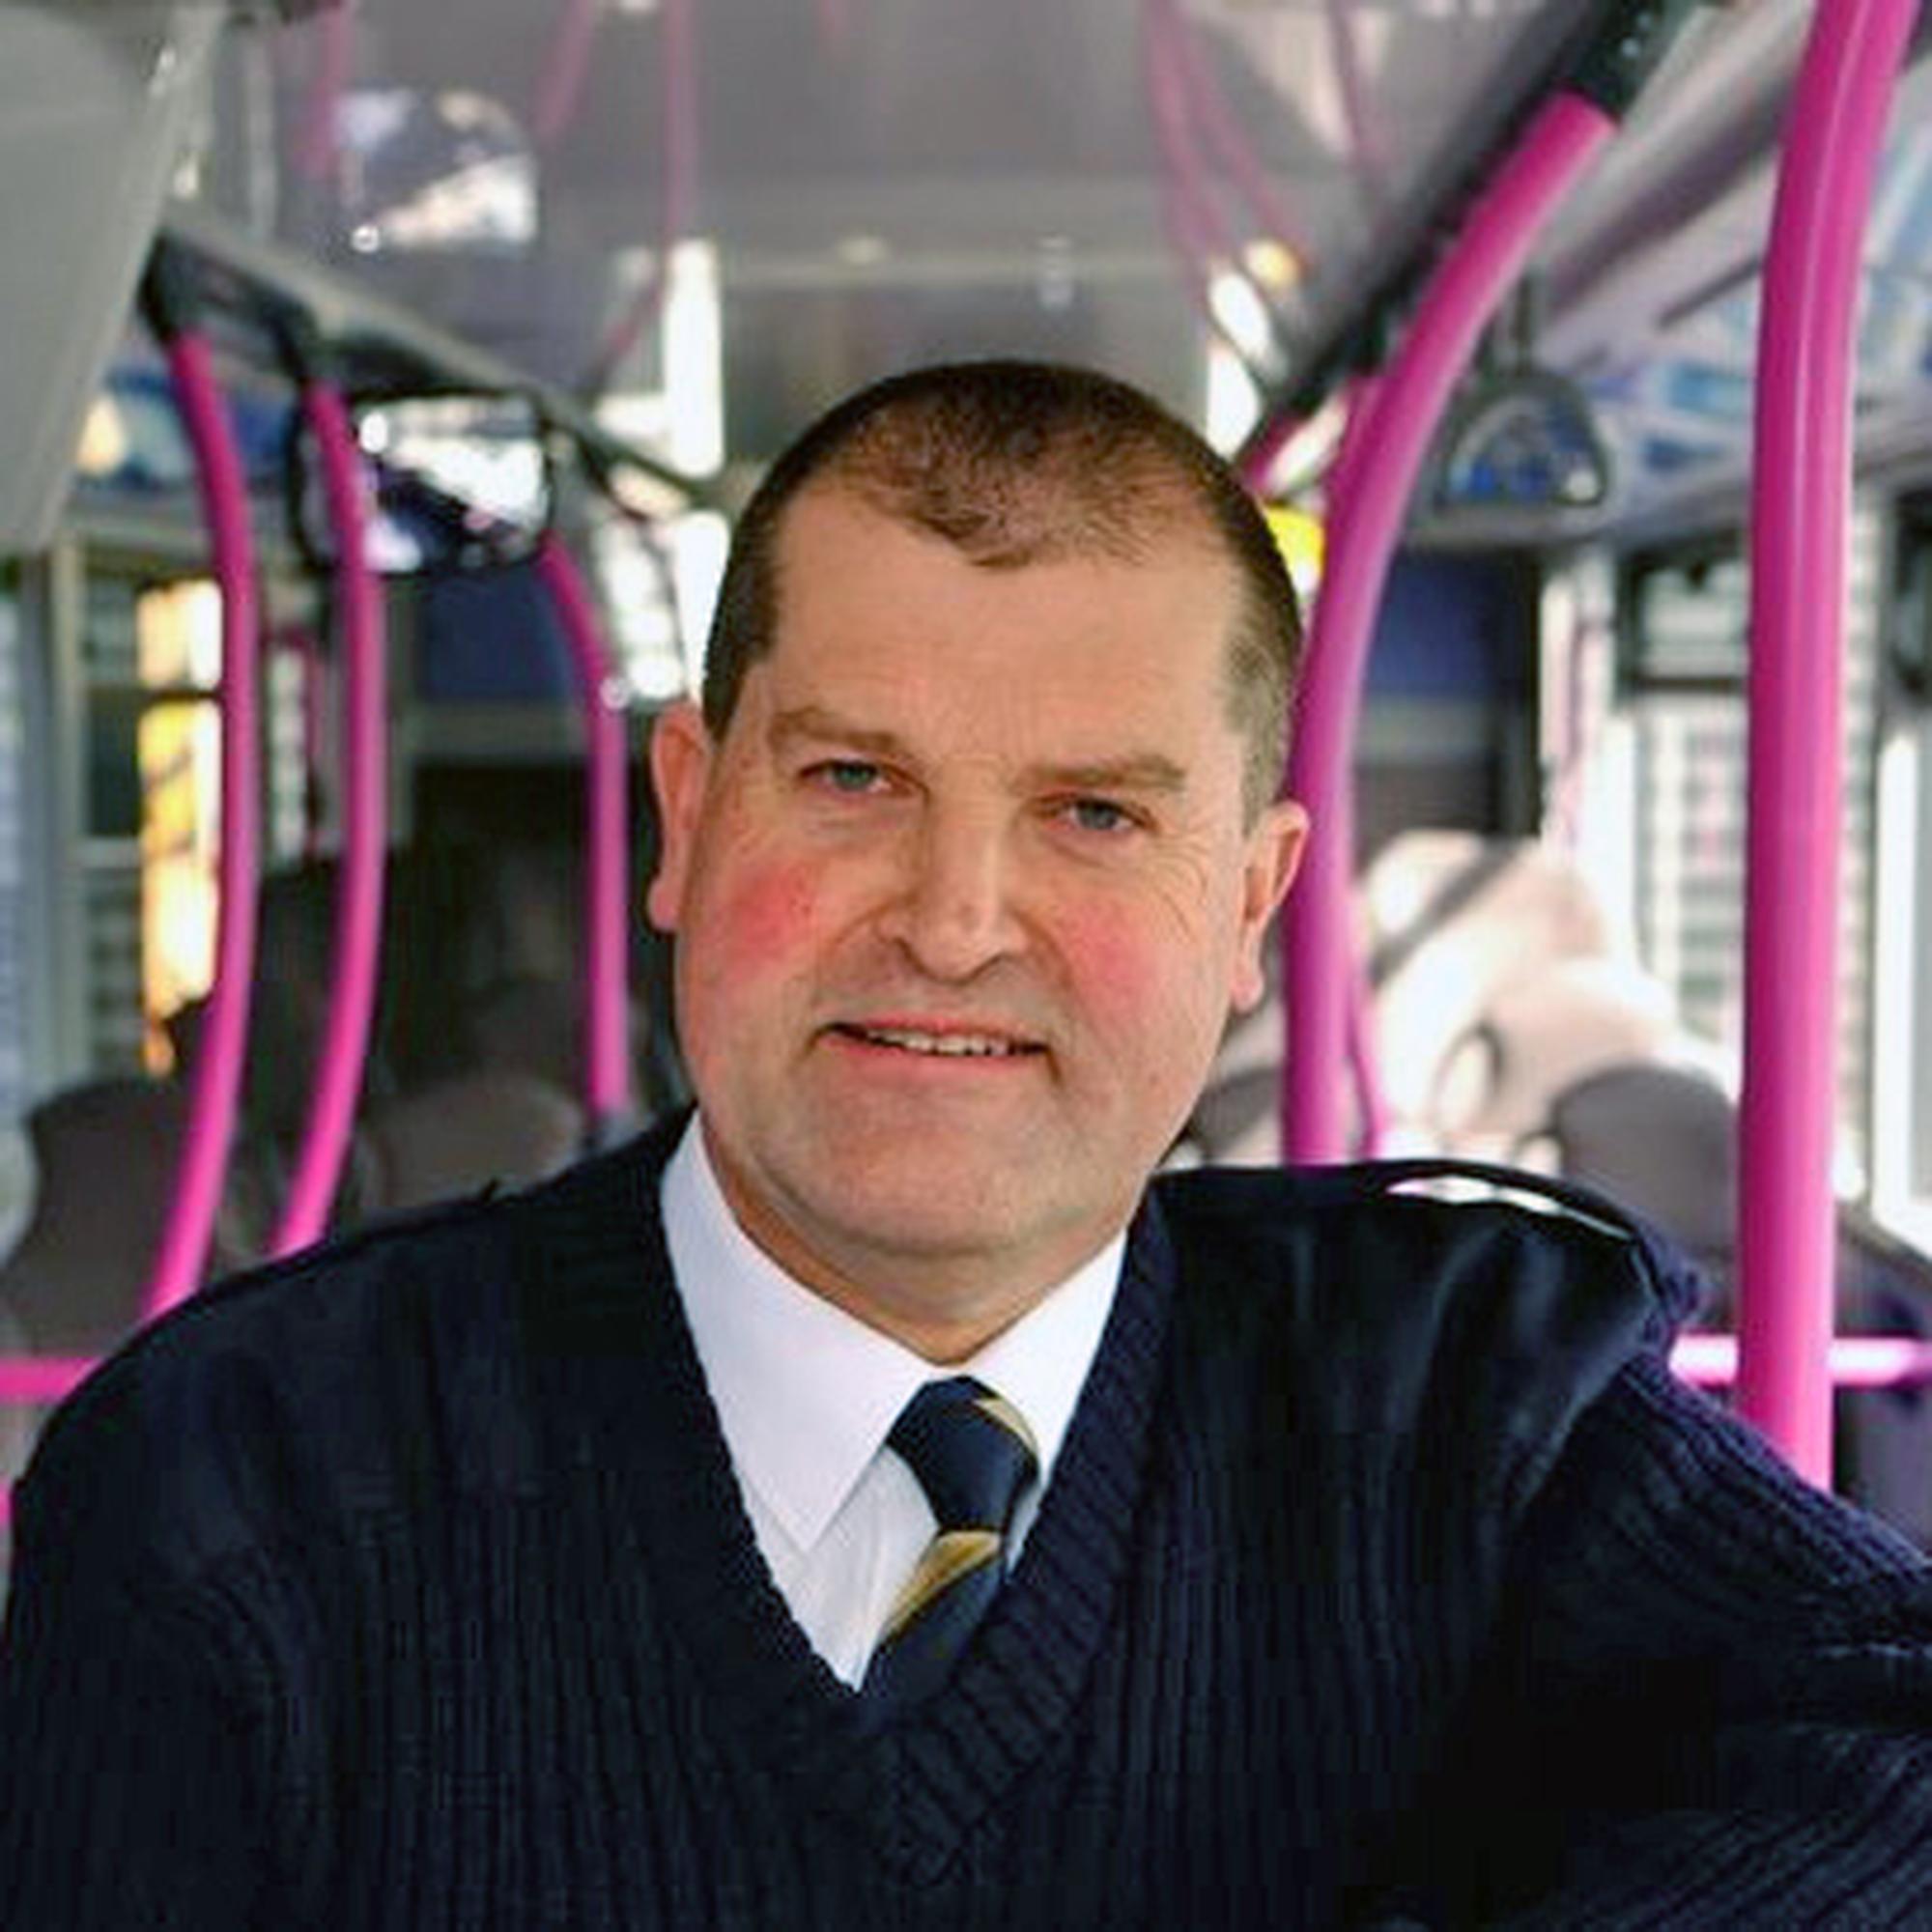 James Freeman: Reducing social distancing to one metre will do little to increase bus capacity